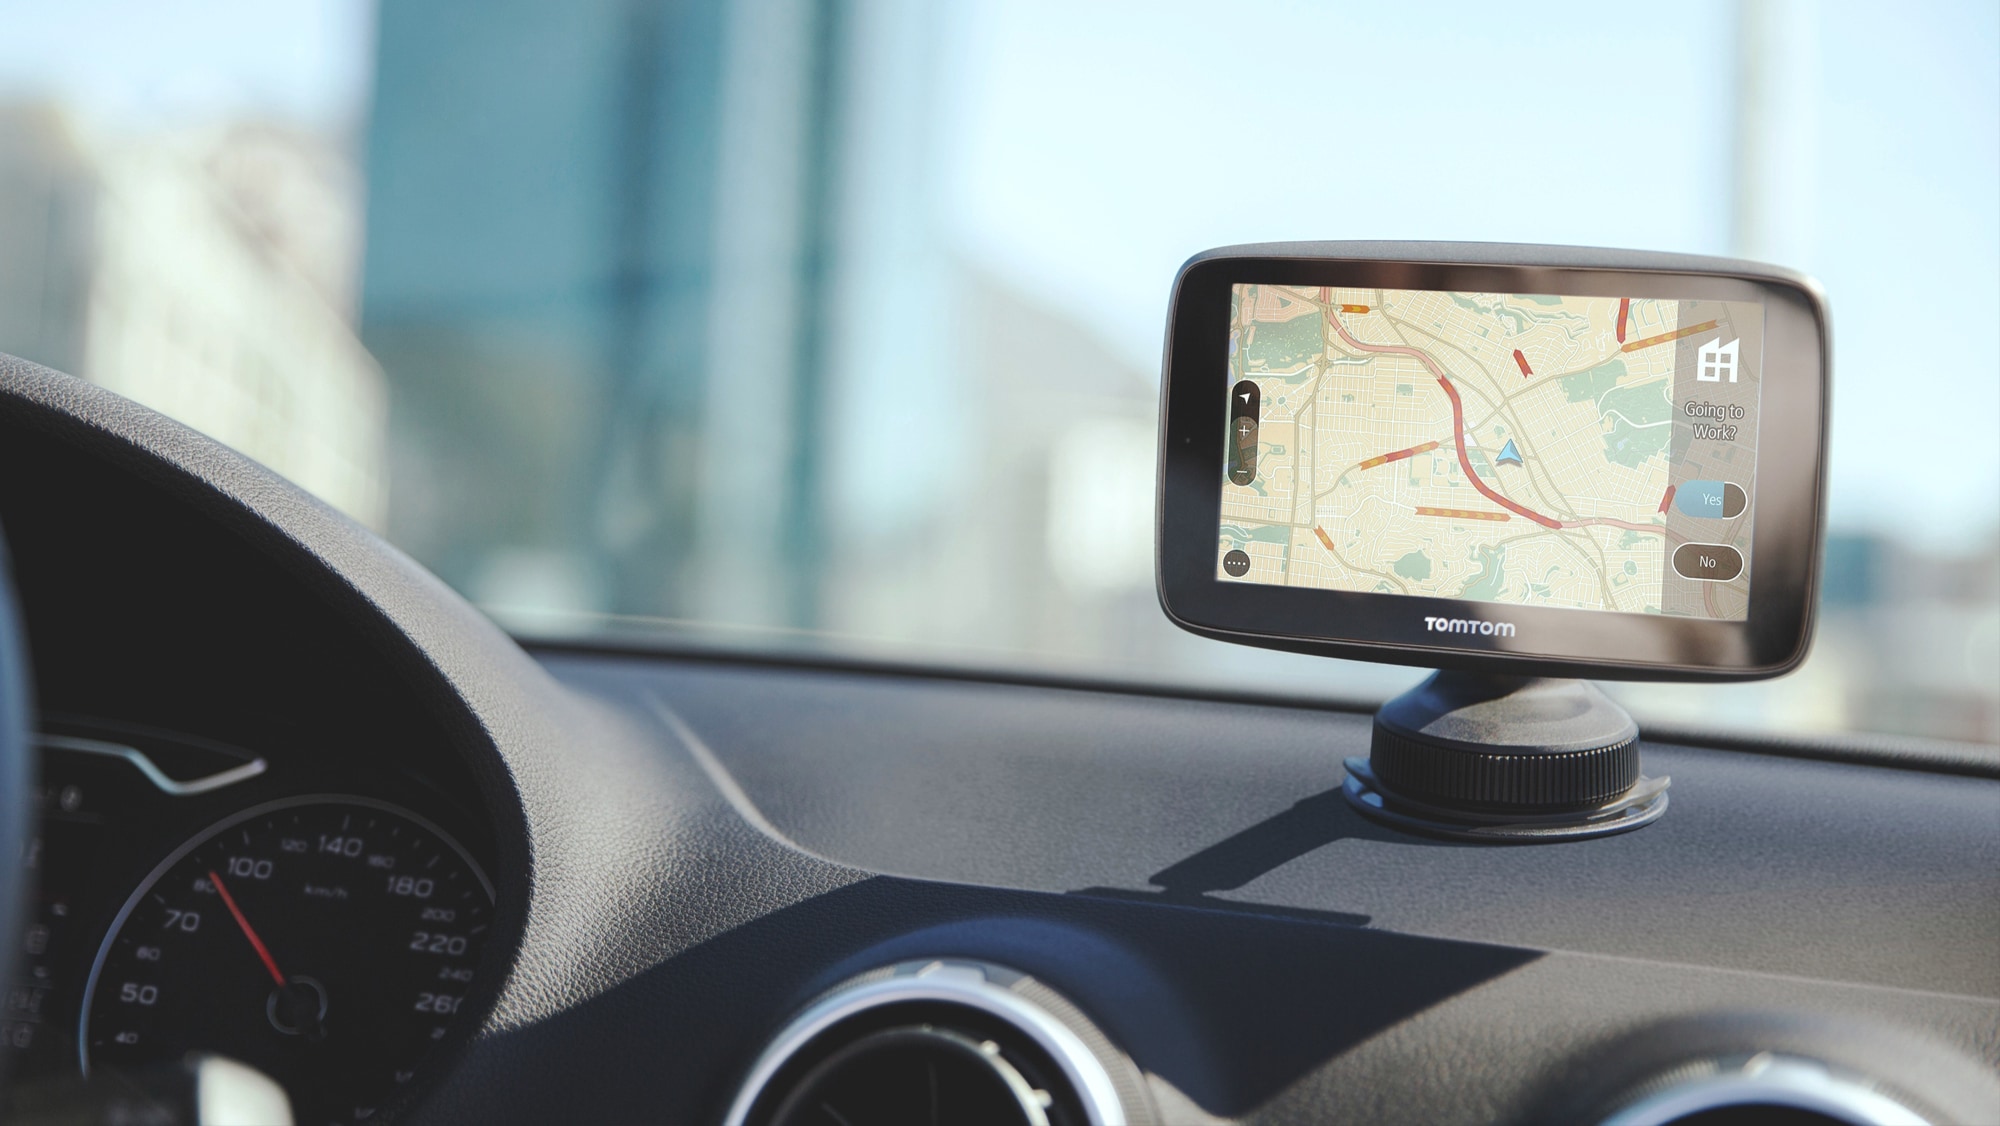 TomTom GO Series with better and brighter touchscreen, provides clear visibility on the navigation